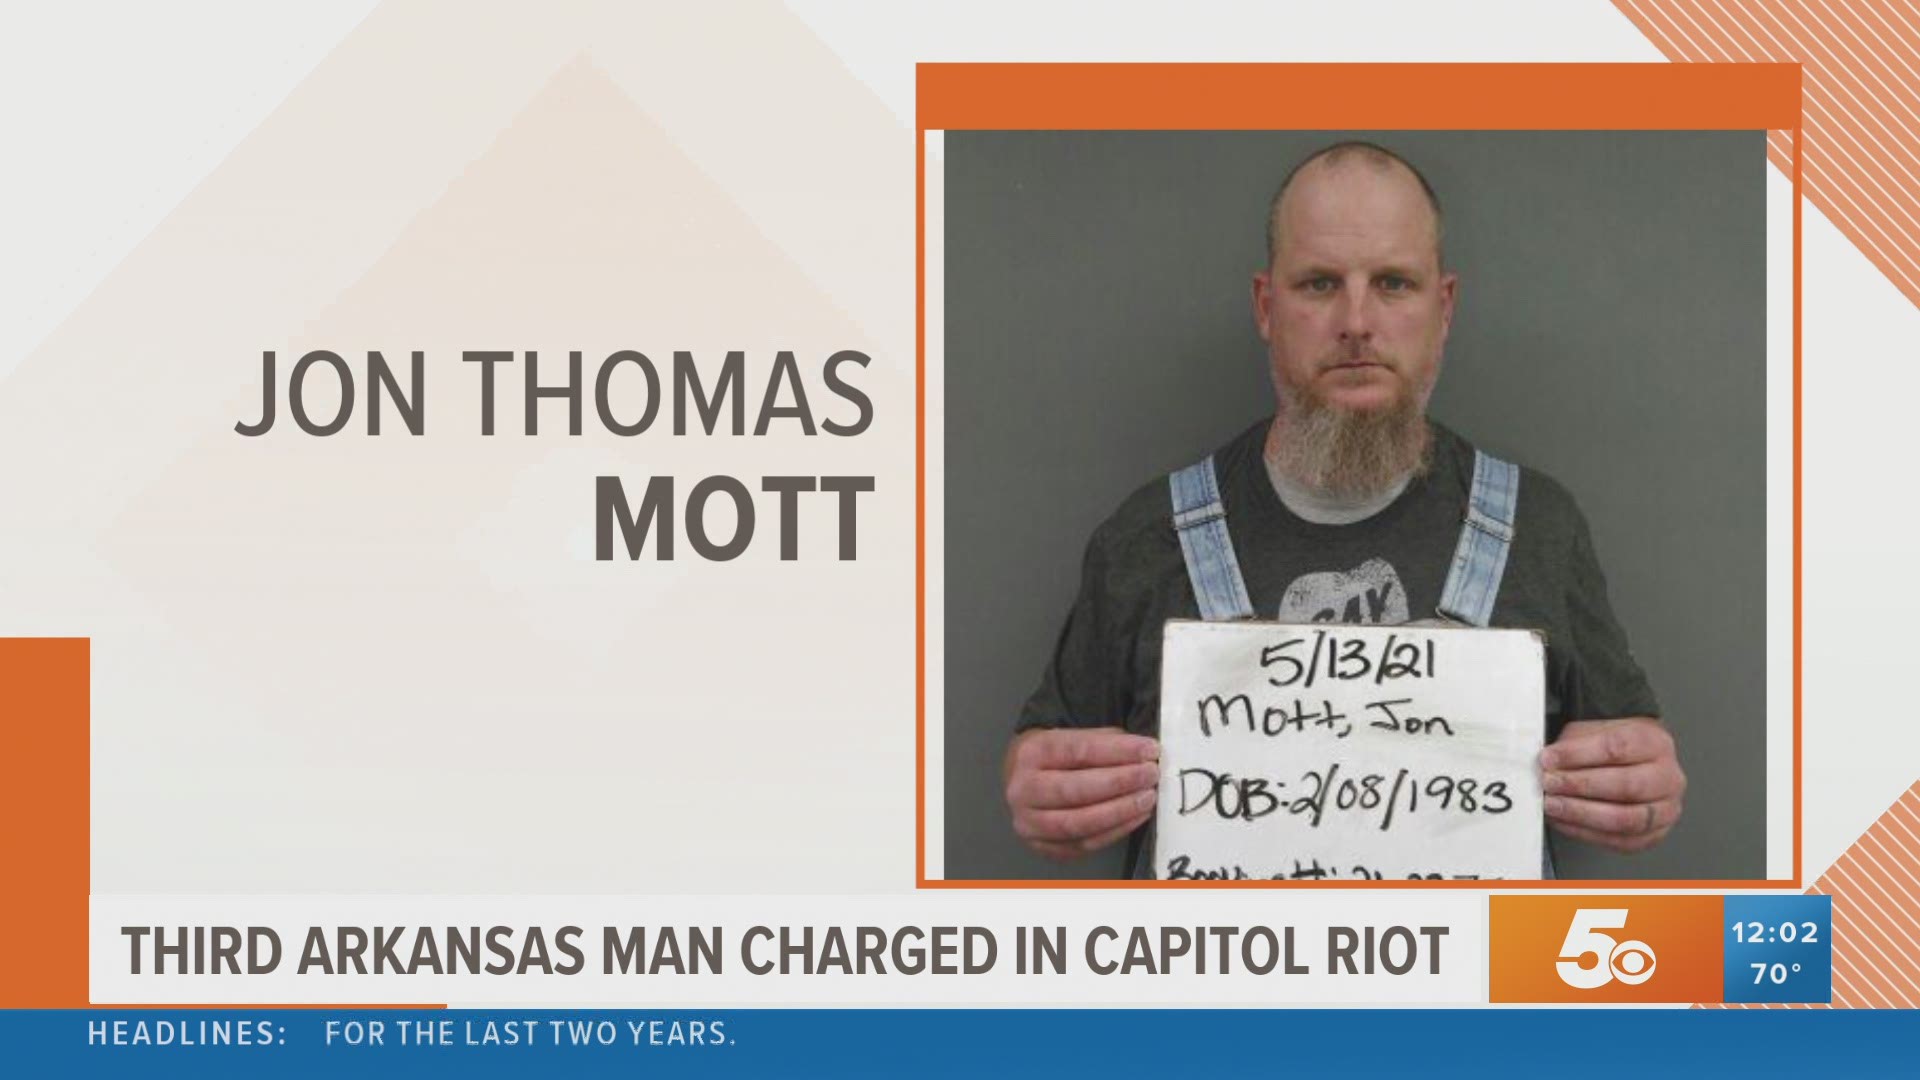 The FBI has identified and arrested Jon Thomas Mott of Flippin for his involvement in the January 6 attacks at the U.S. Capitol.